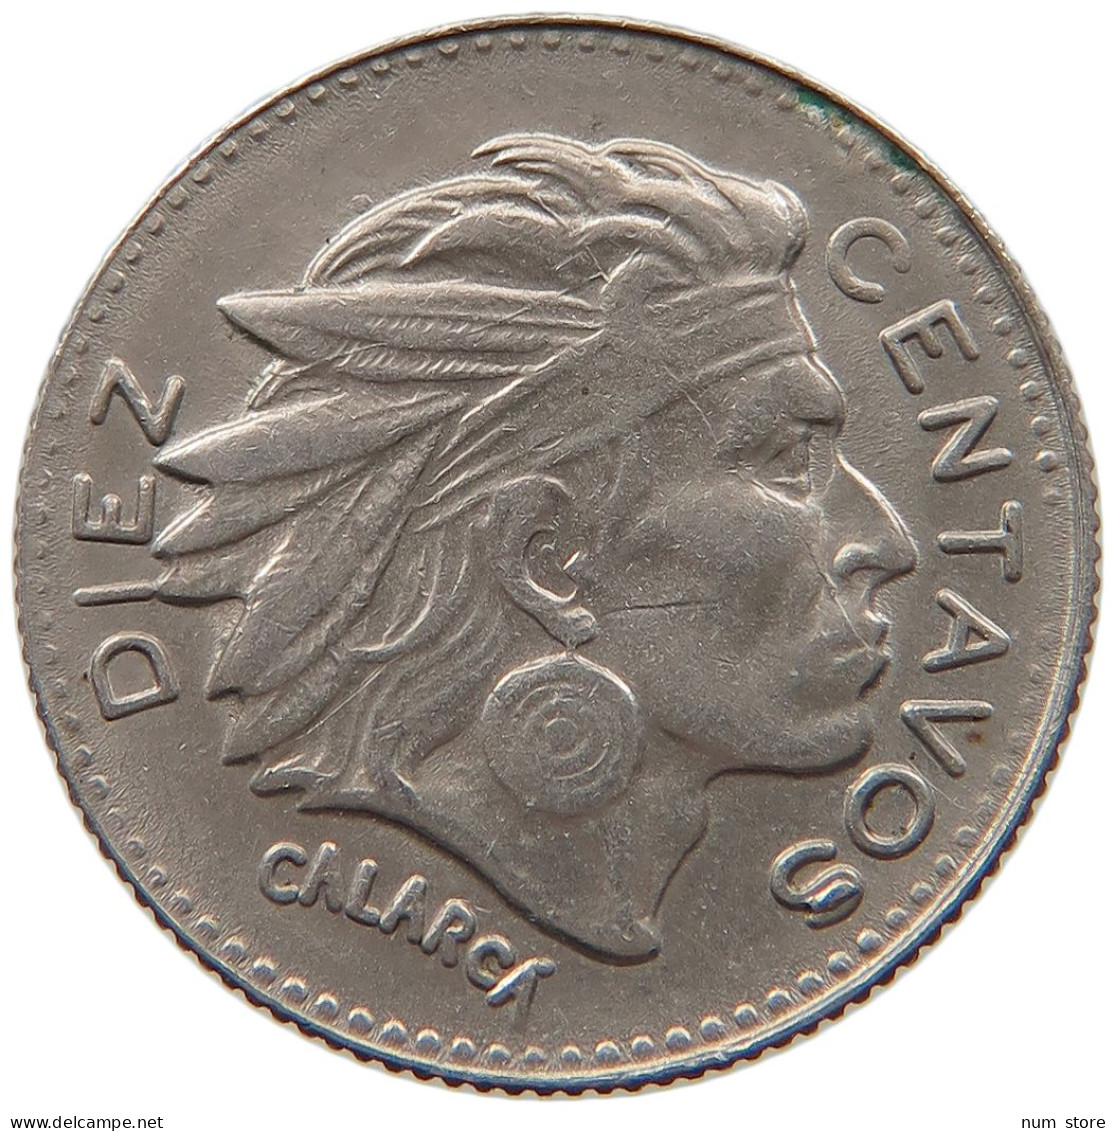 COLOMBIA 10 CENTAVOS 1959  #MA 067212 - Colombia